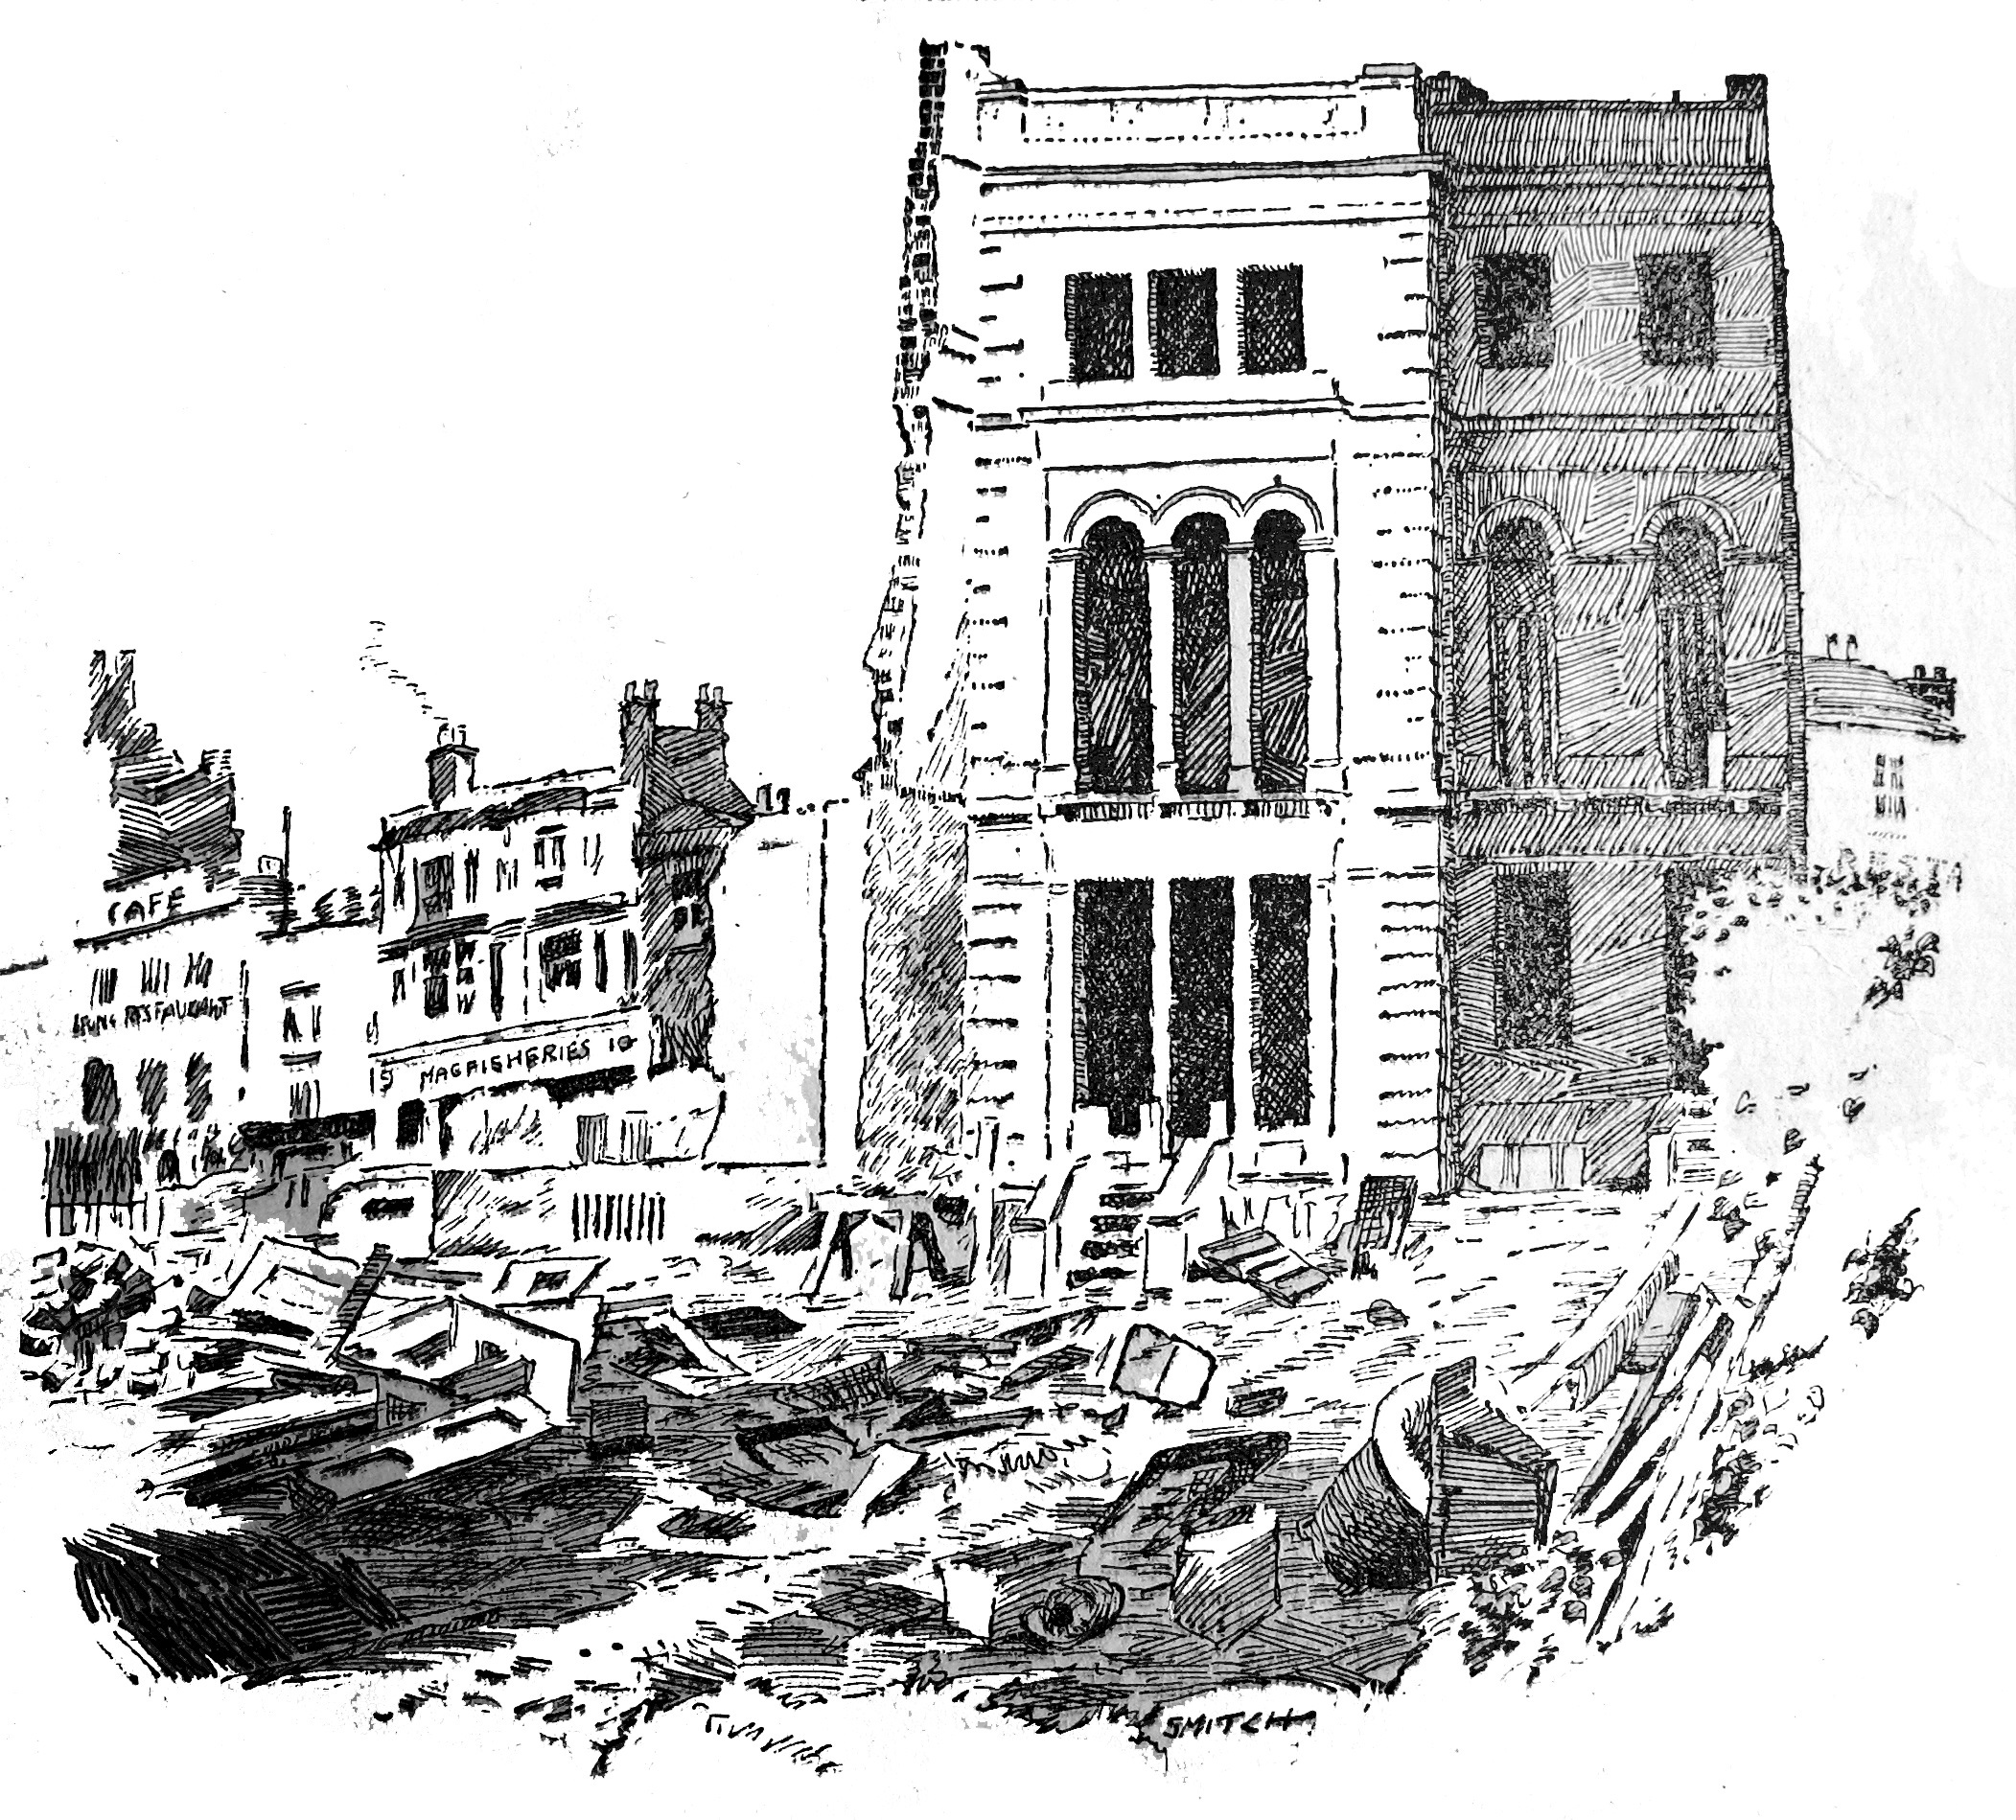 The demolition of the Pier Hotel in October 1931 in a sketch by Tom Smitch, a gifted amateur cartoonist who worked as a printer at the CP. His work regularly appeared in its pages.